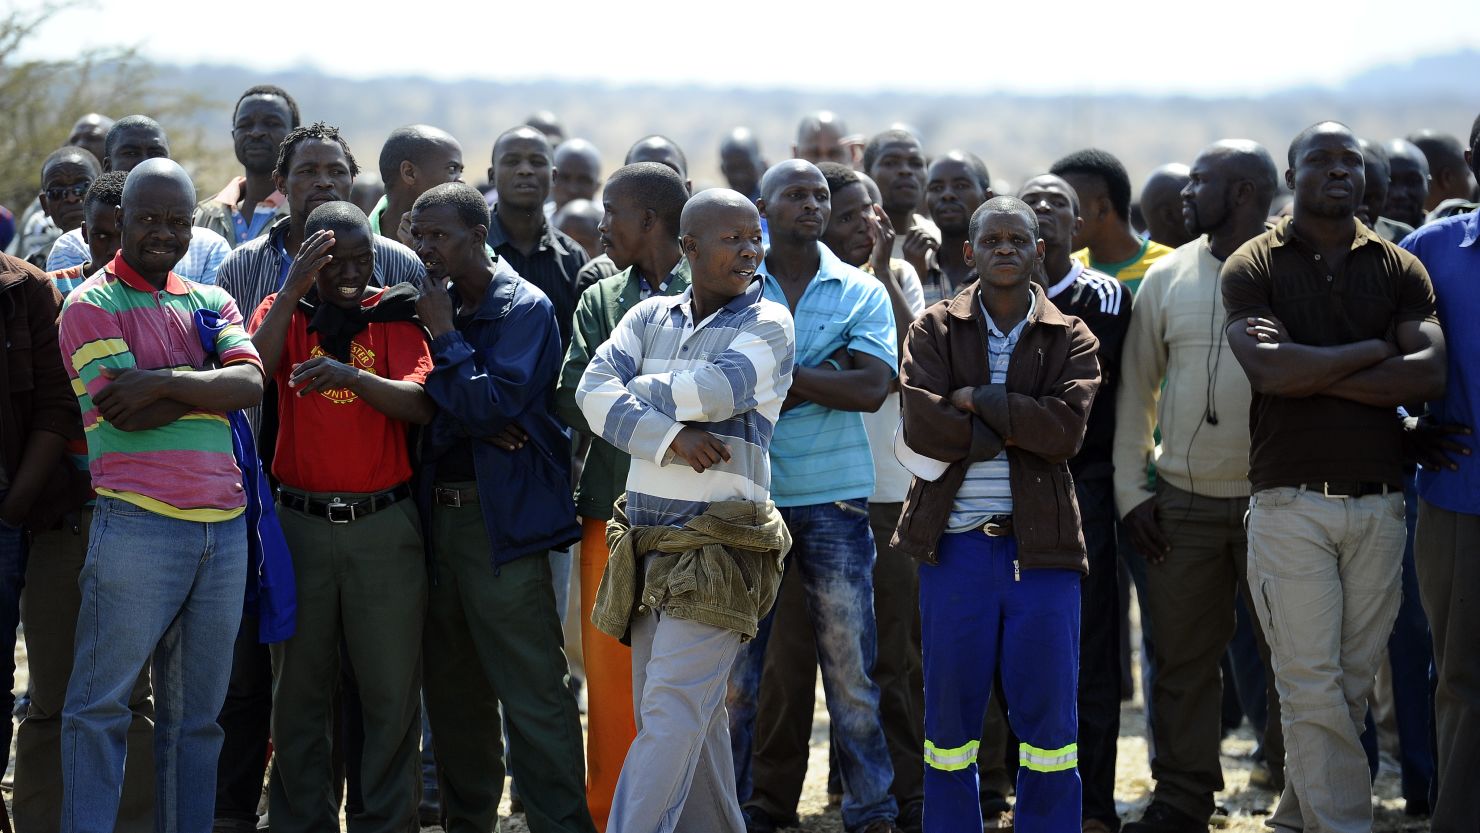 Striking platinum miners pictured at the mine on 20 August.